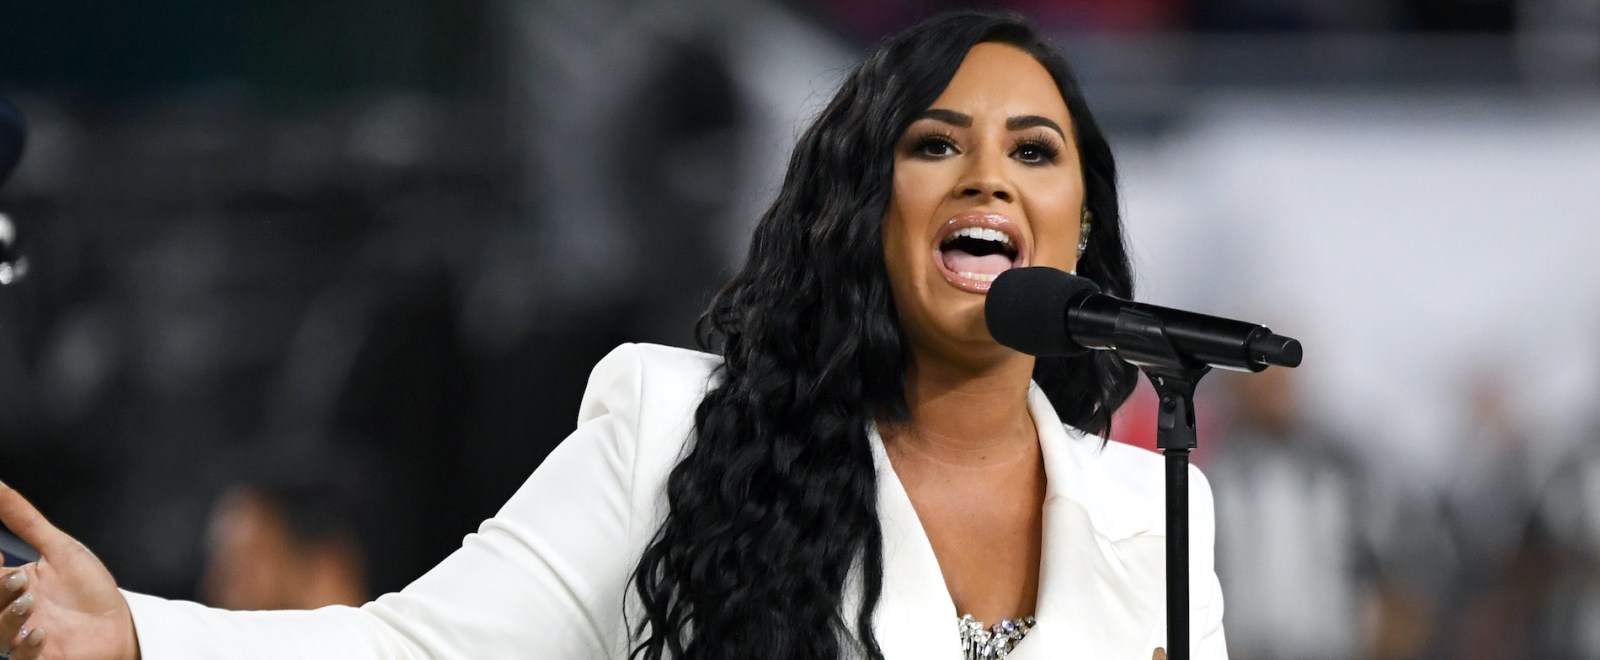 Demi Lovato Shares A Post Explaining Why Gender Reveal Parties Are Transphobic